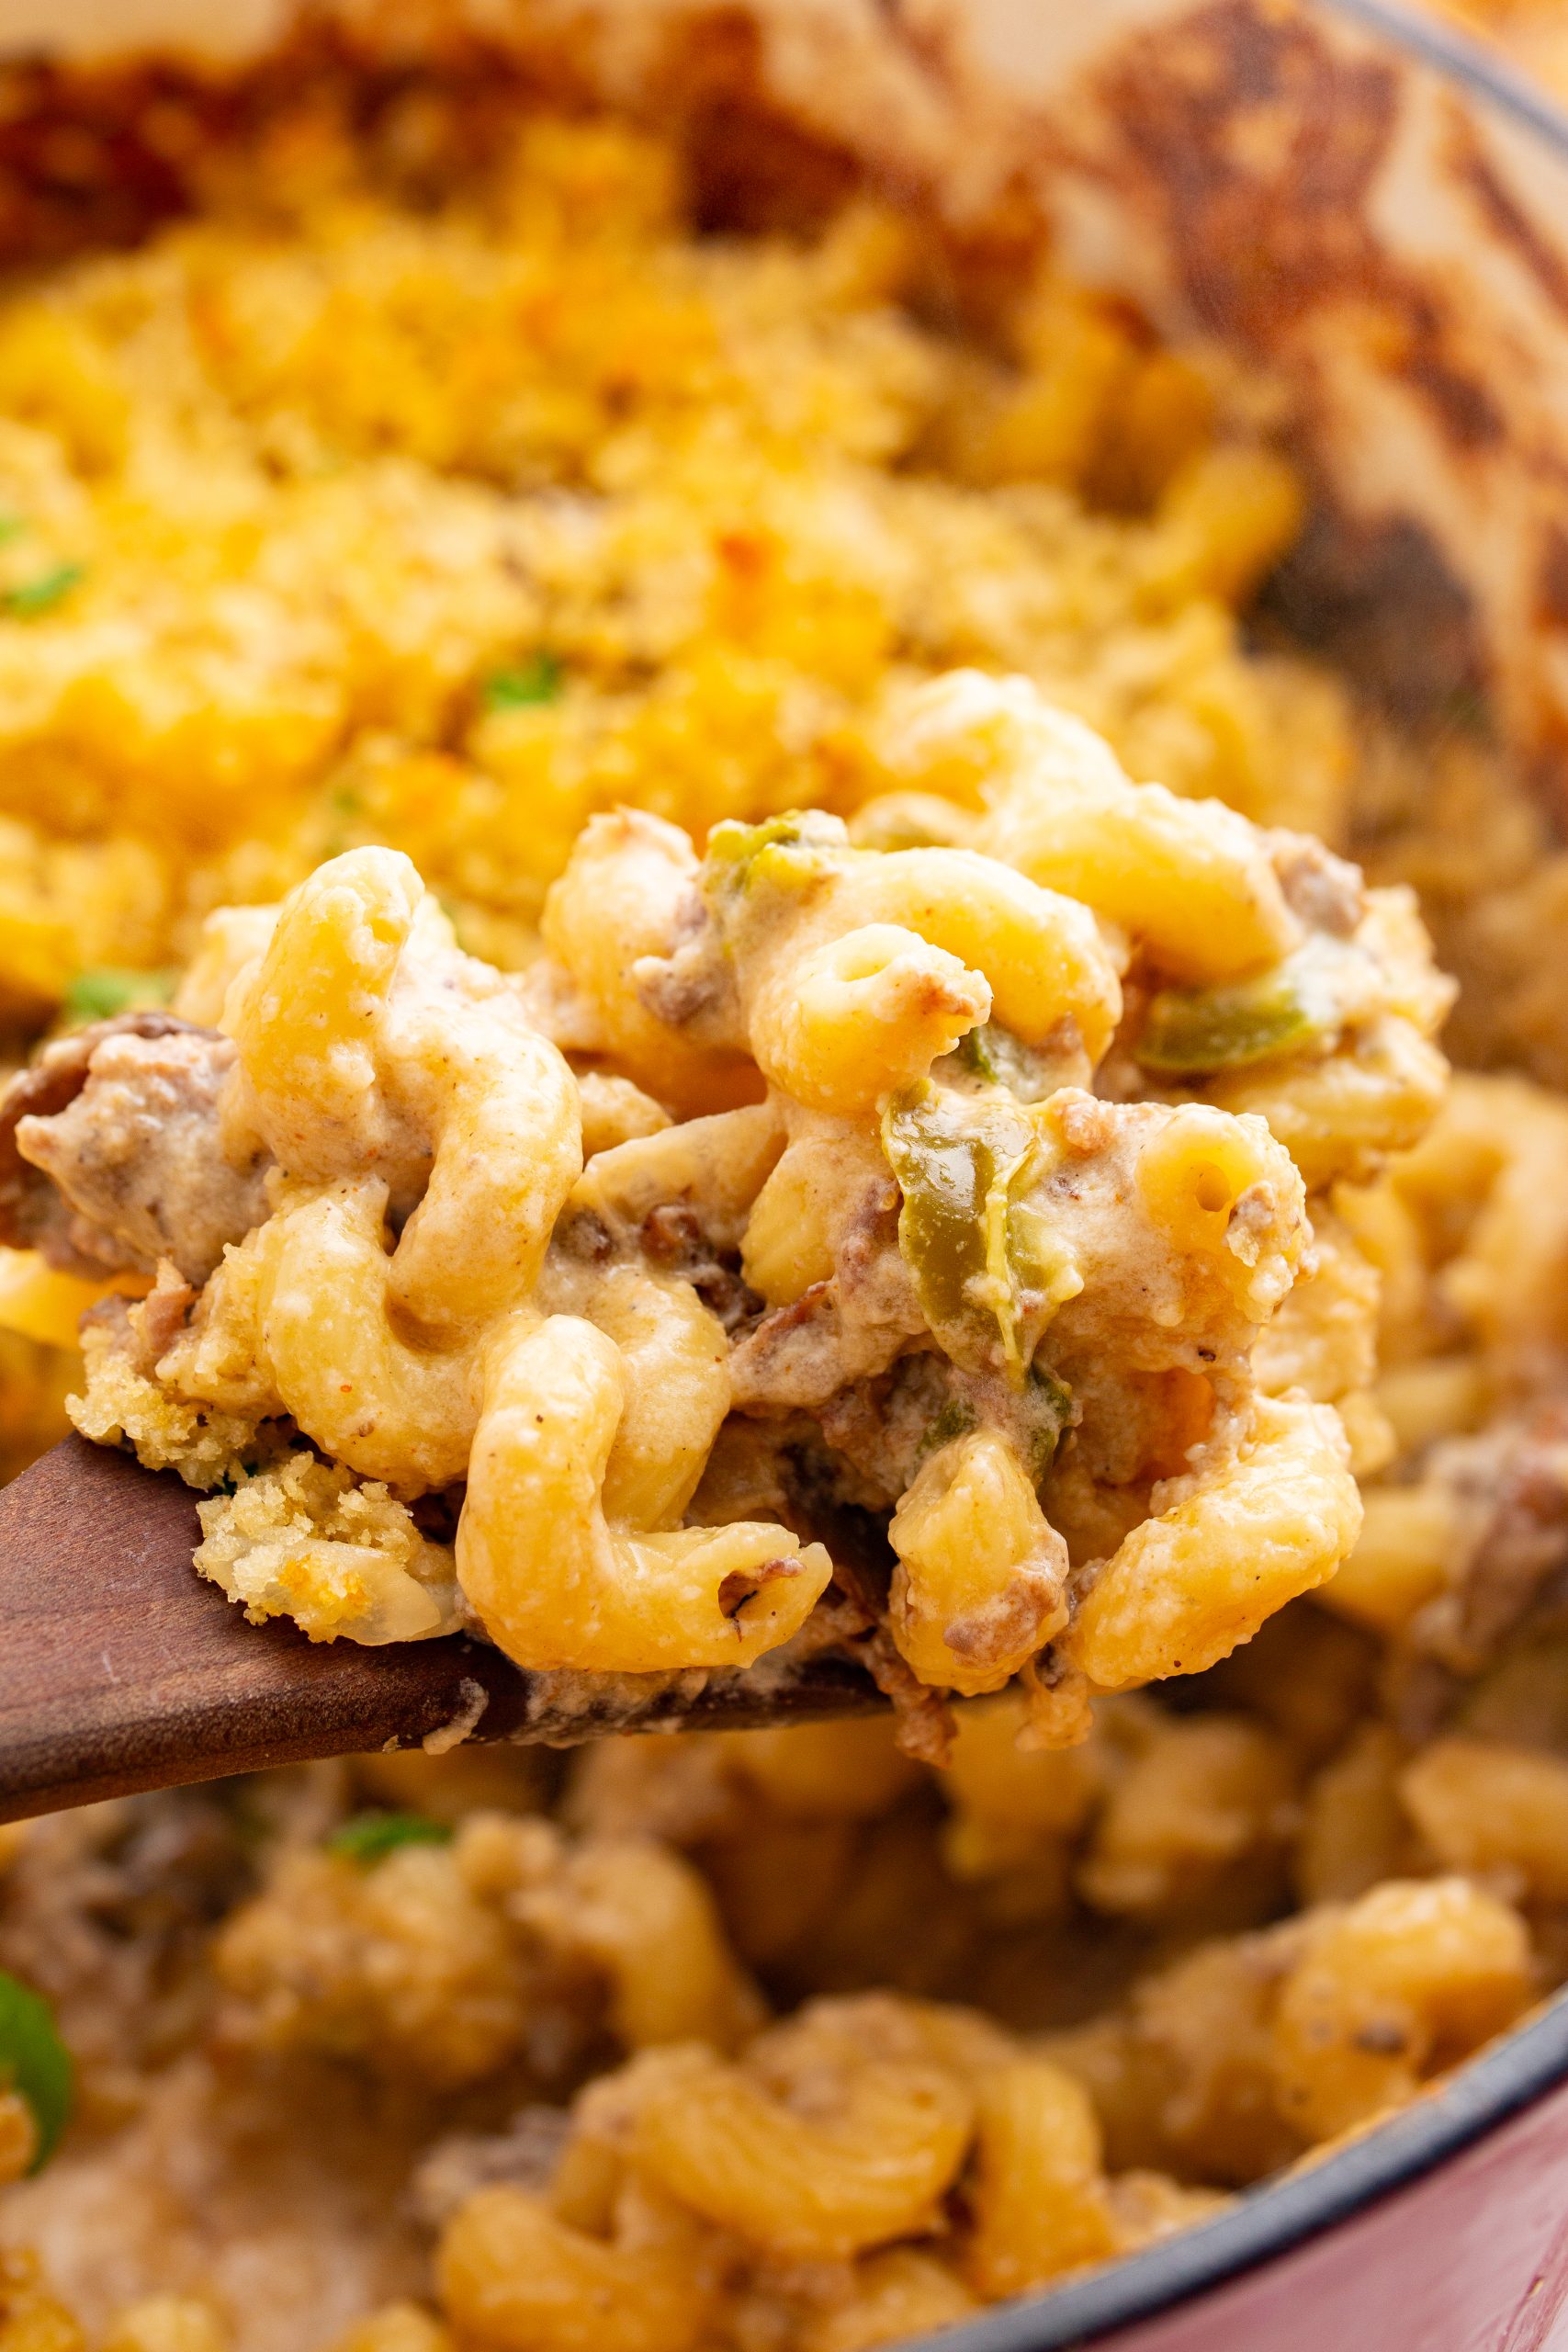 A close-up of a spoonful of creamy pasta with breadcrumbs and pieces of meat, being lifted from a pot.